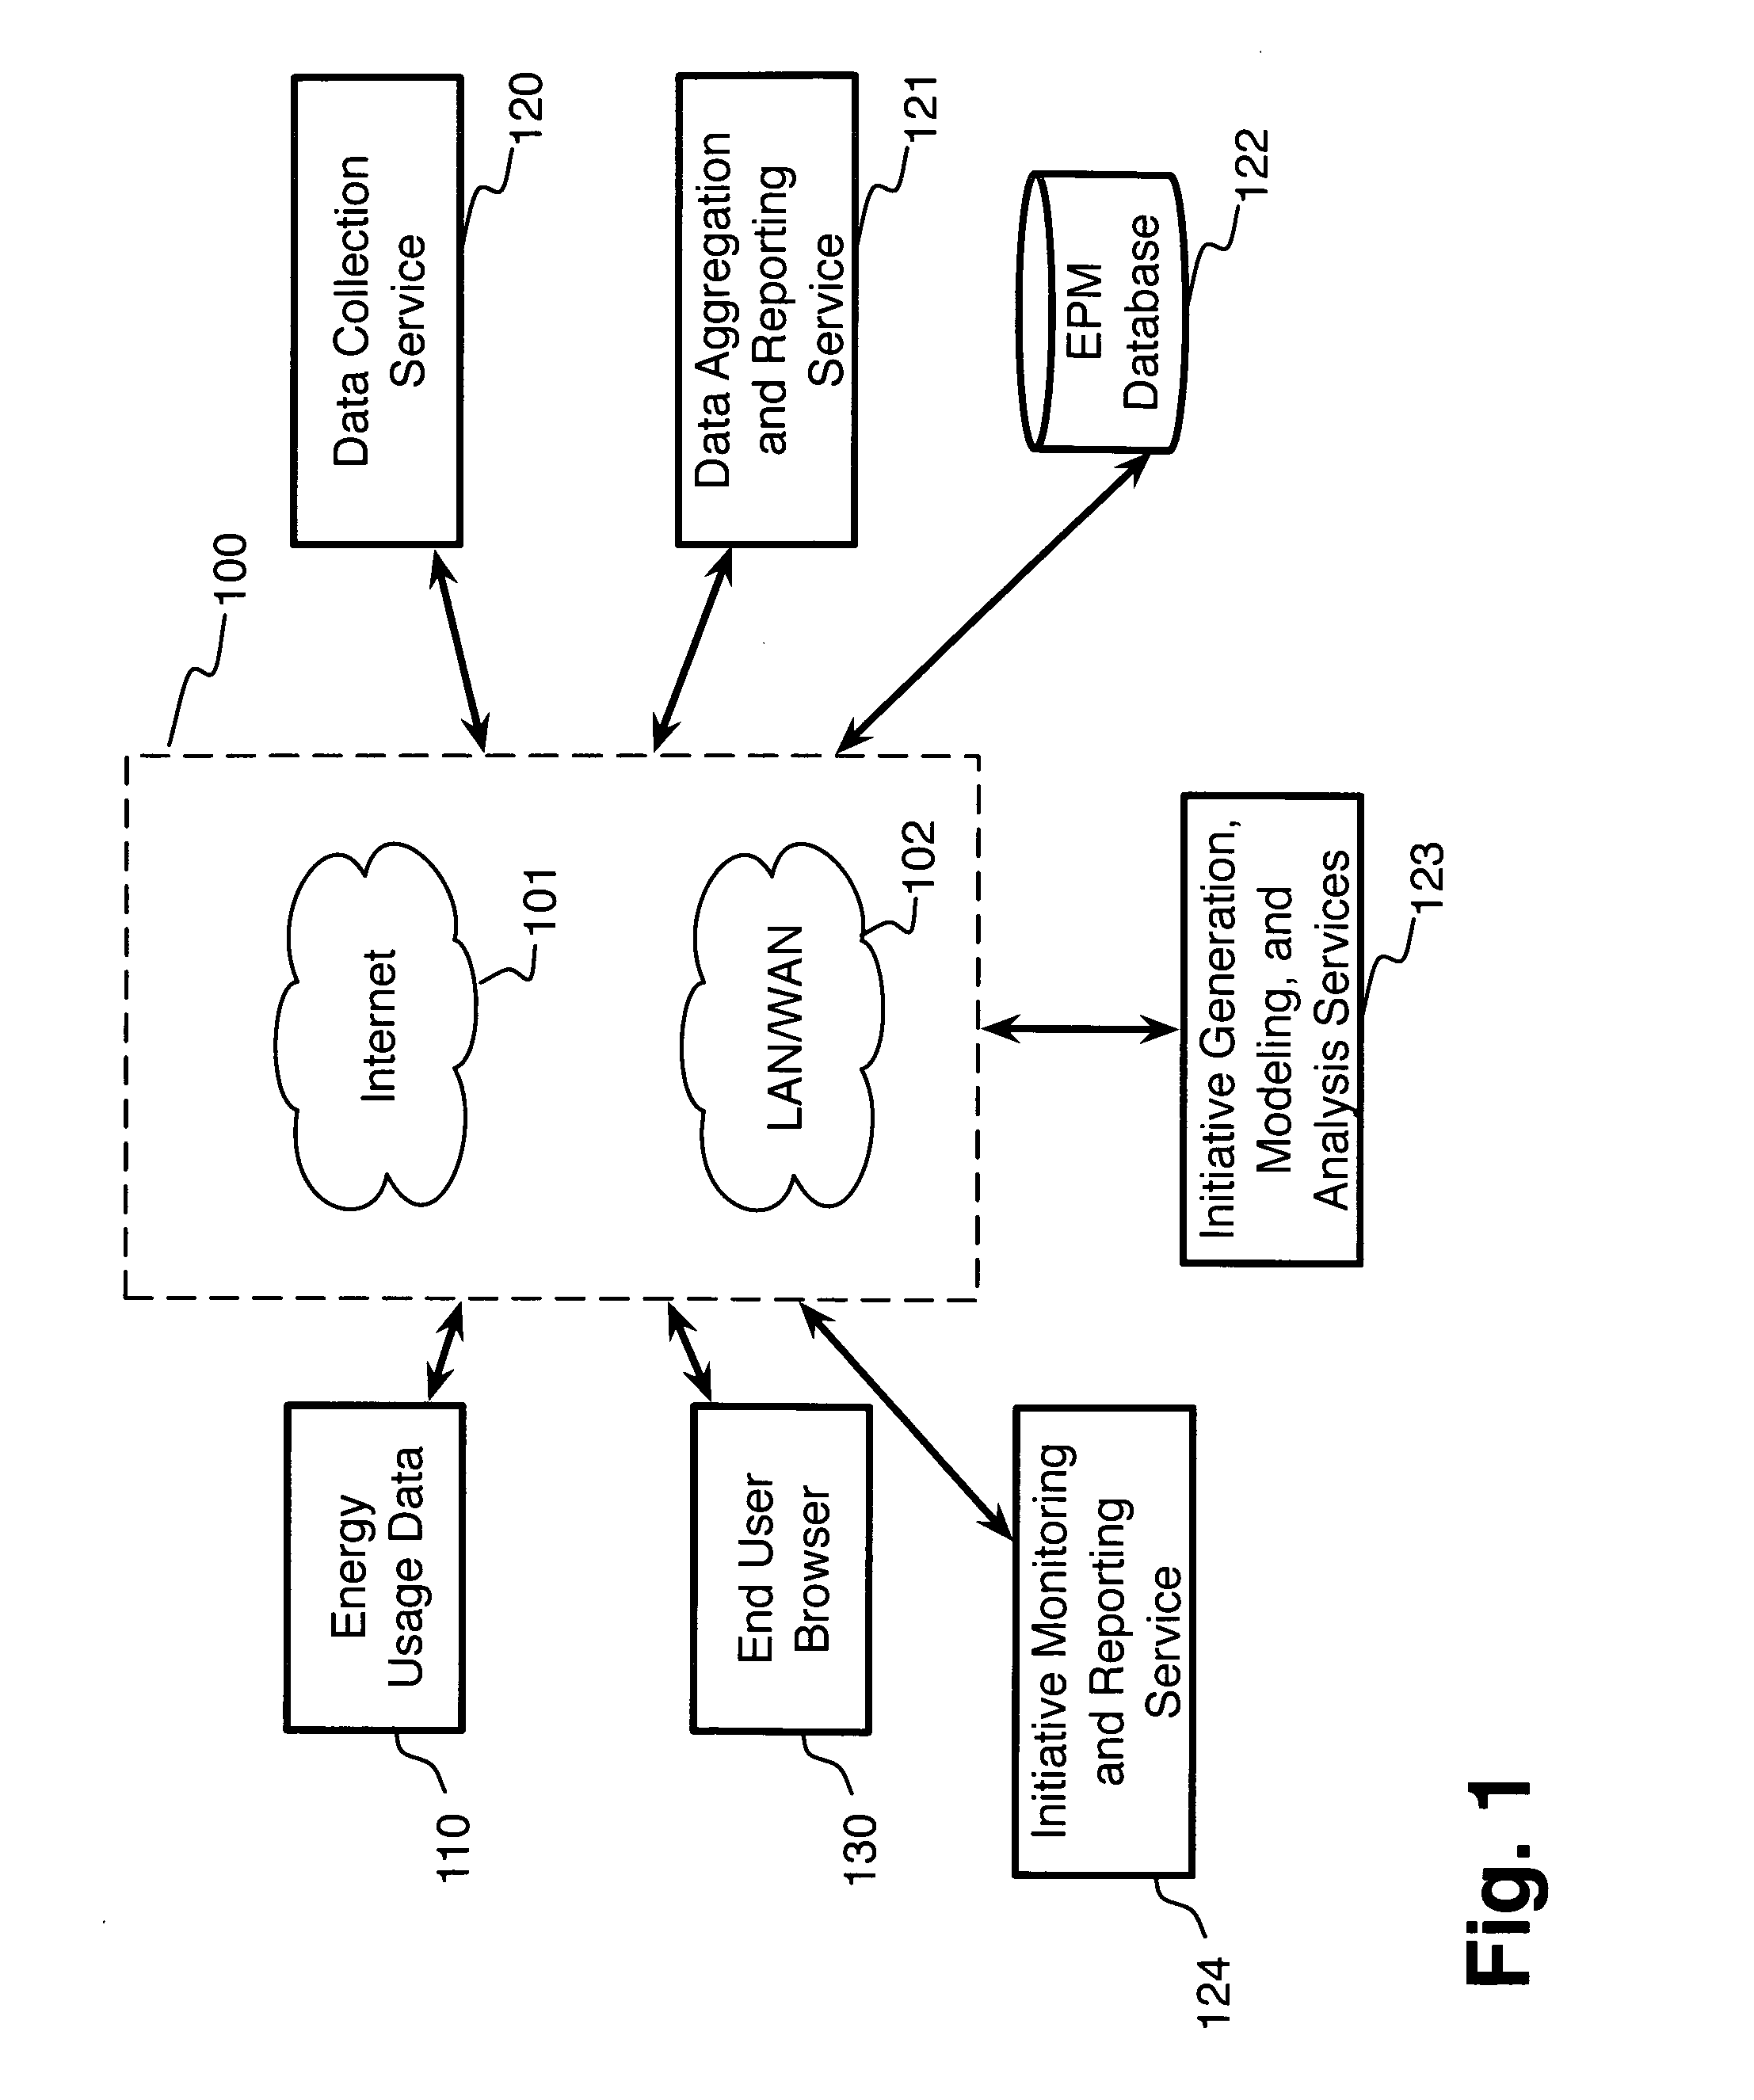 System and method for energy performance management